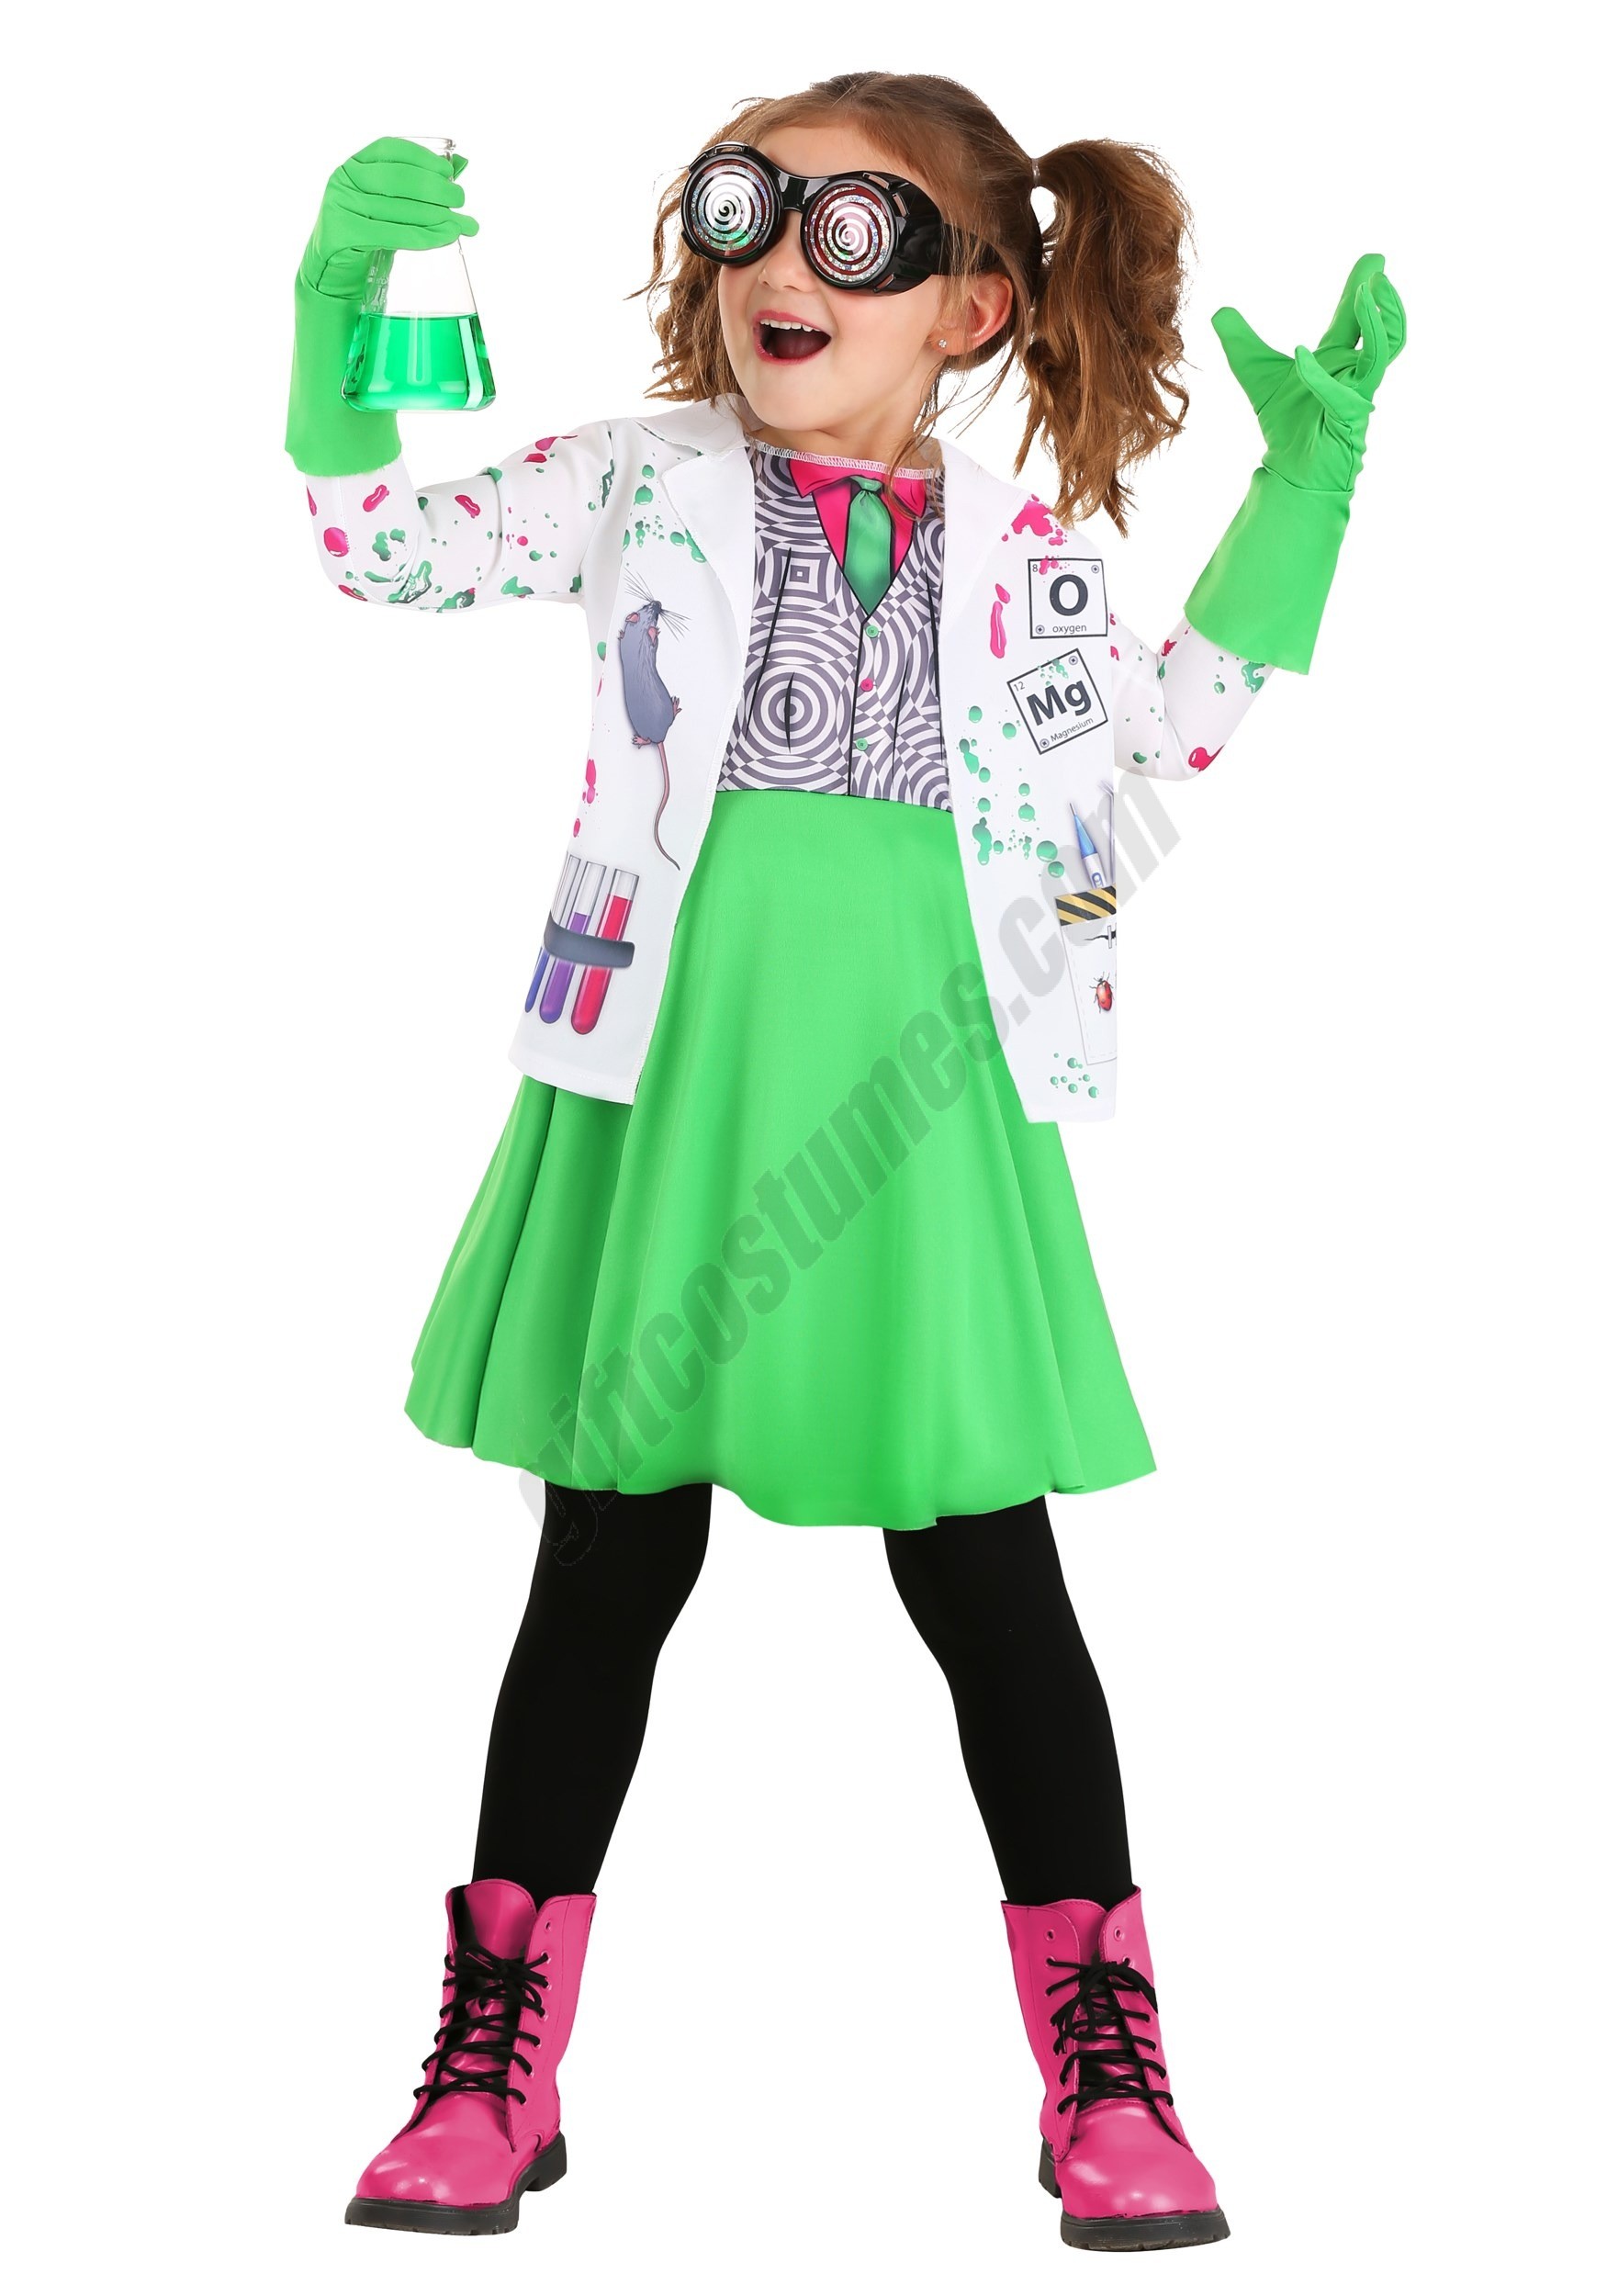 Mad Scientist Costume for Toddlers Promotions - Mad Scientist Costume for Toddlers Promotions